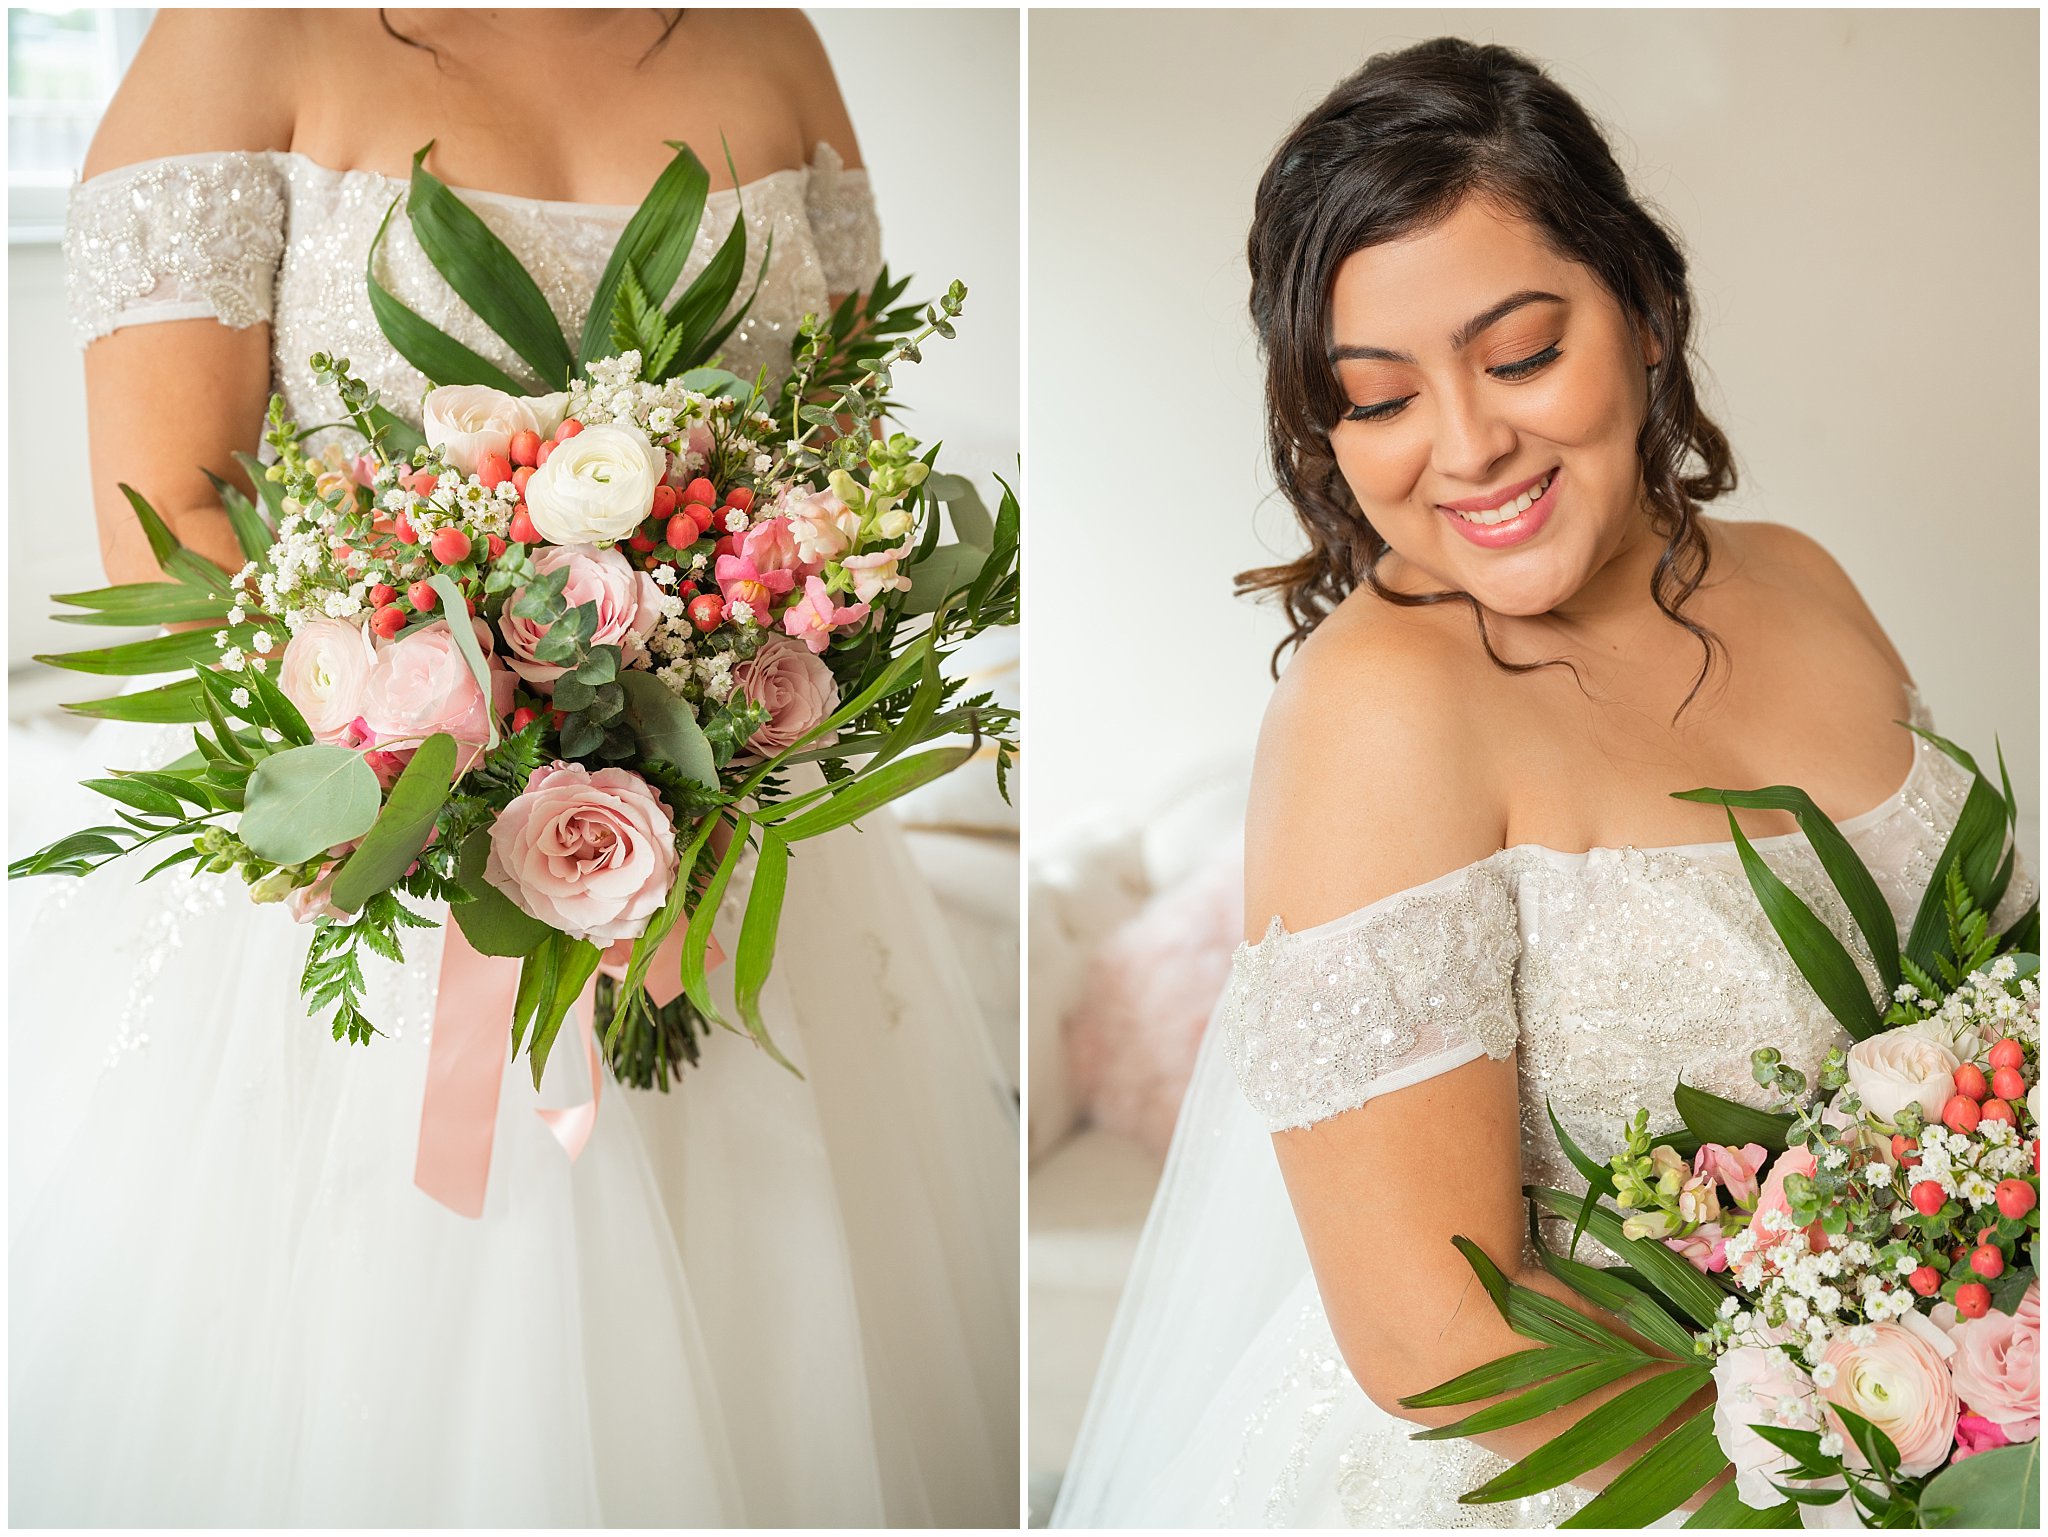 Bridal portraits in lace princess dress with pink floral bouquet | Rustic Mountain Destination Wedding at Oak Hills Utah | Jessie and Dallin Photography